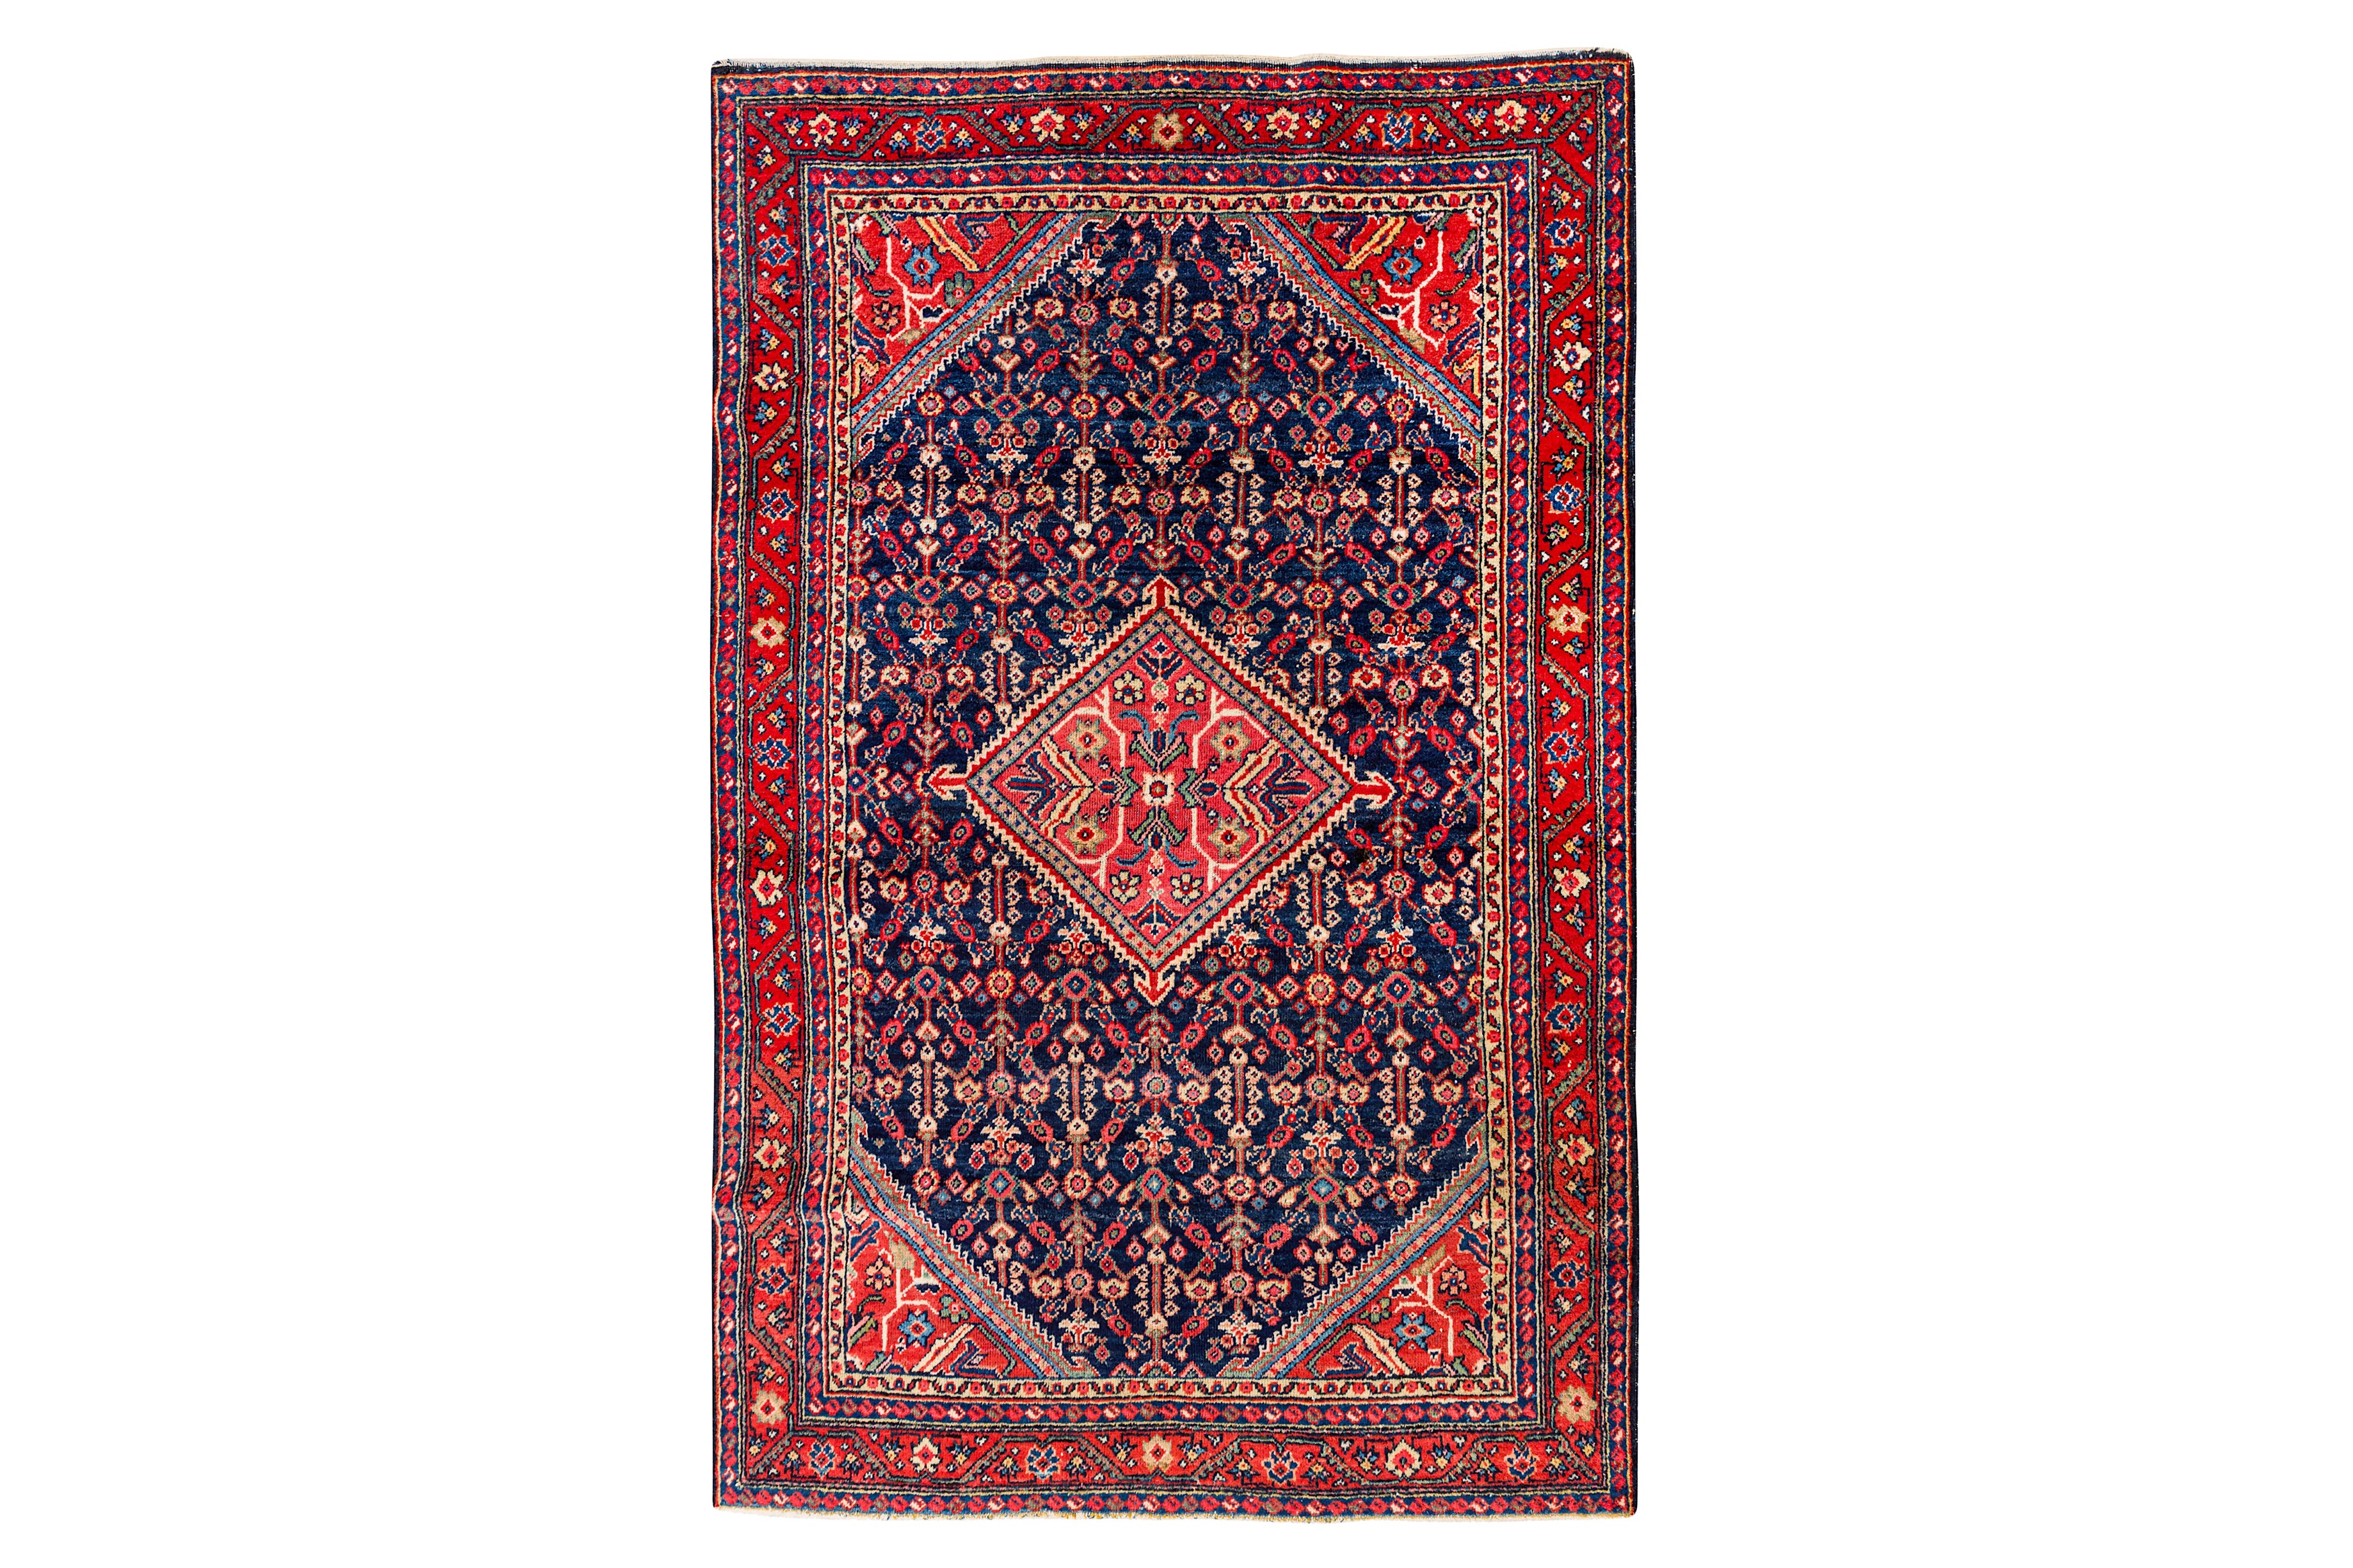 AN ANTIQUE MAHAL RUG, WEST PERSIA